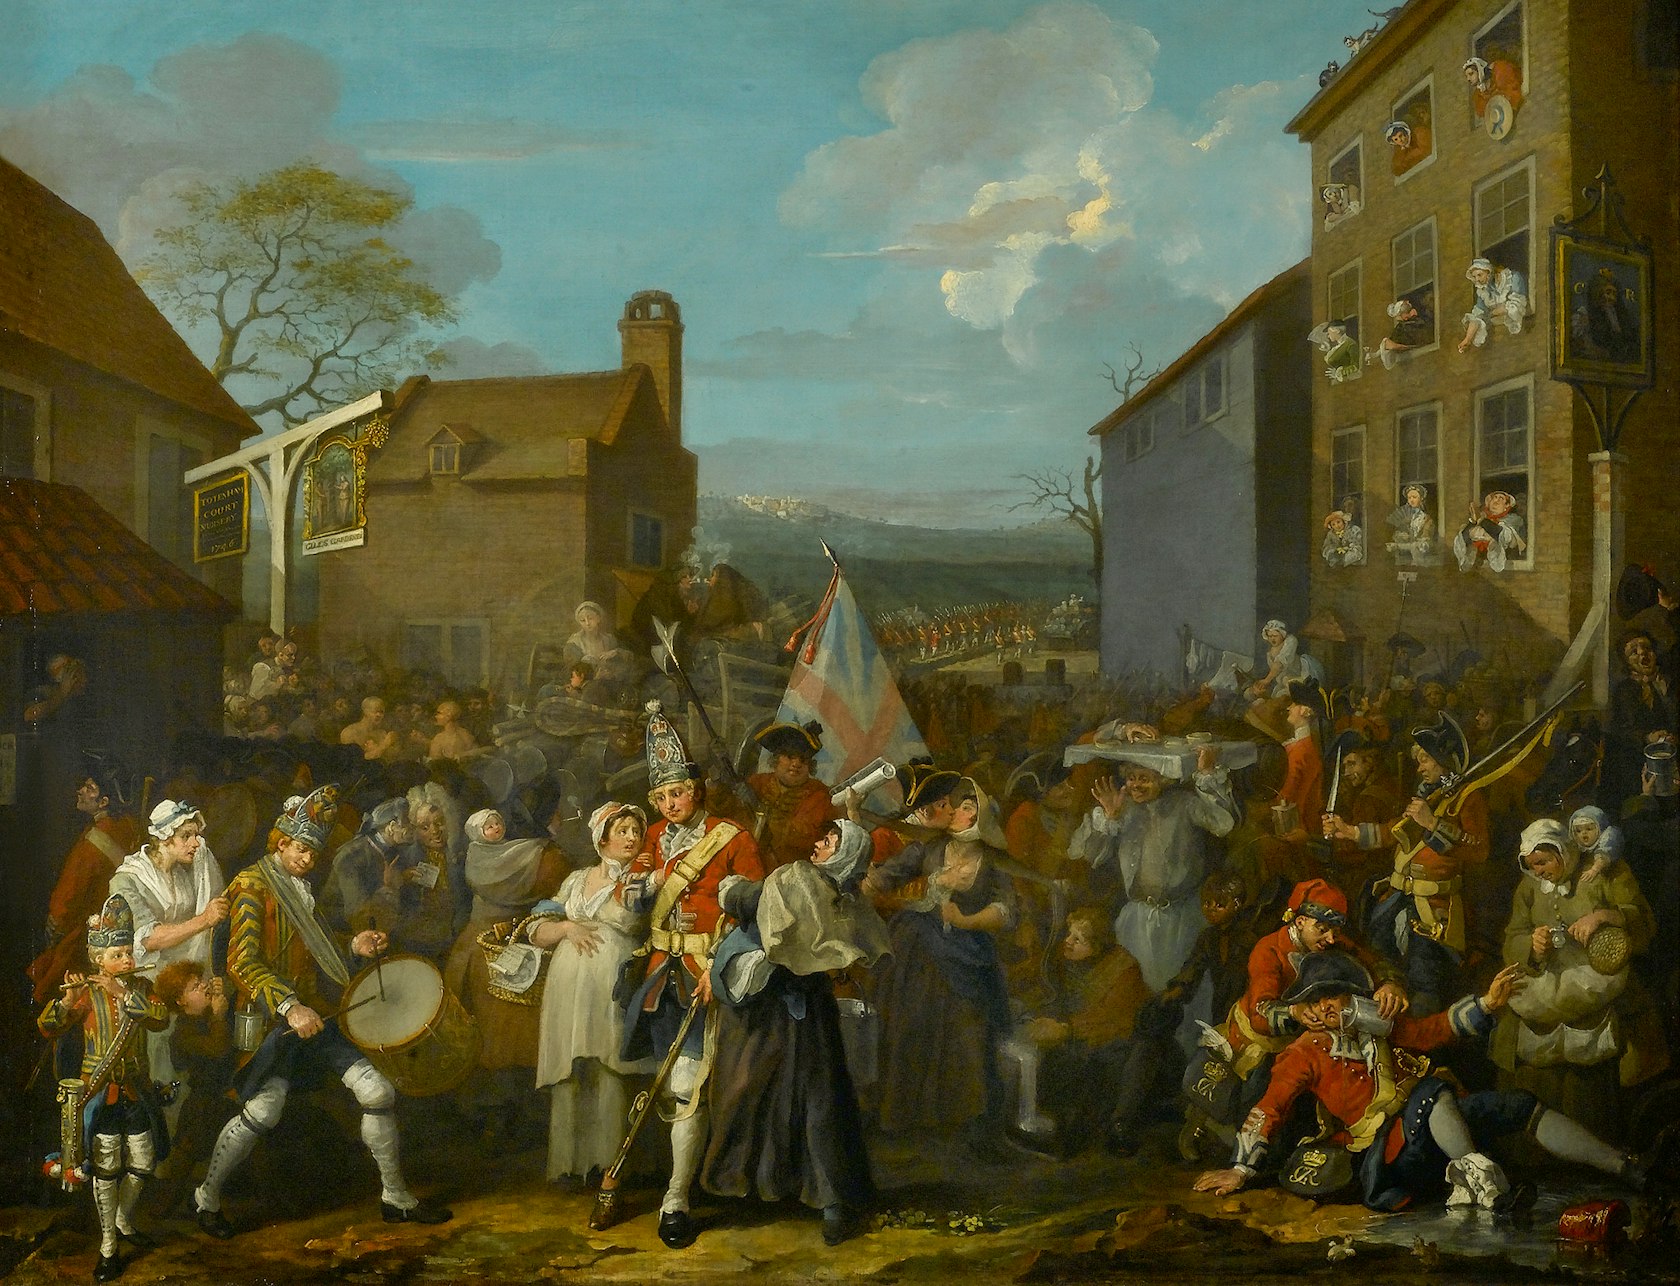 William Hogarth, The March of the Guards to Finchley, 1749-1750, oil on canvas (c) The Foundling Museum, London &#8211; medium res